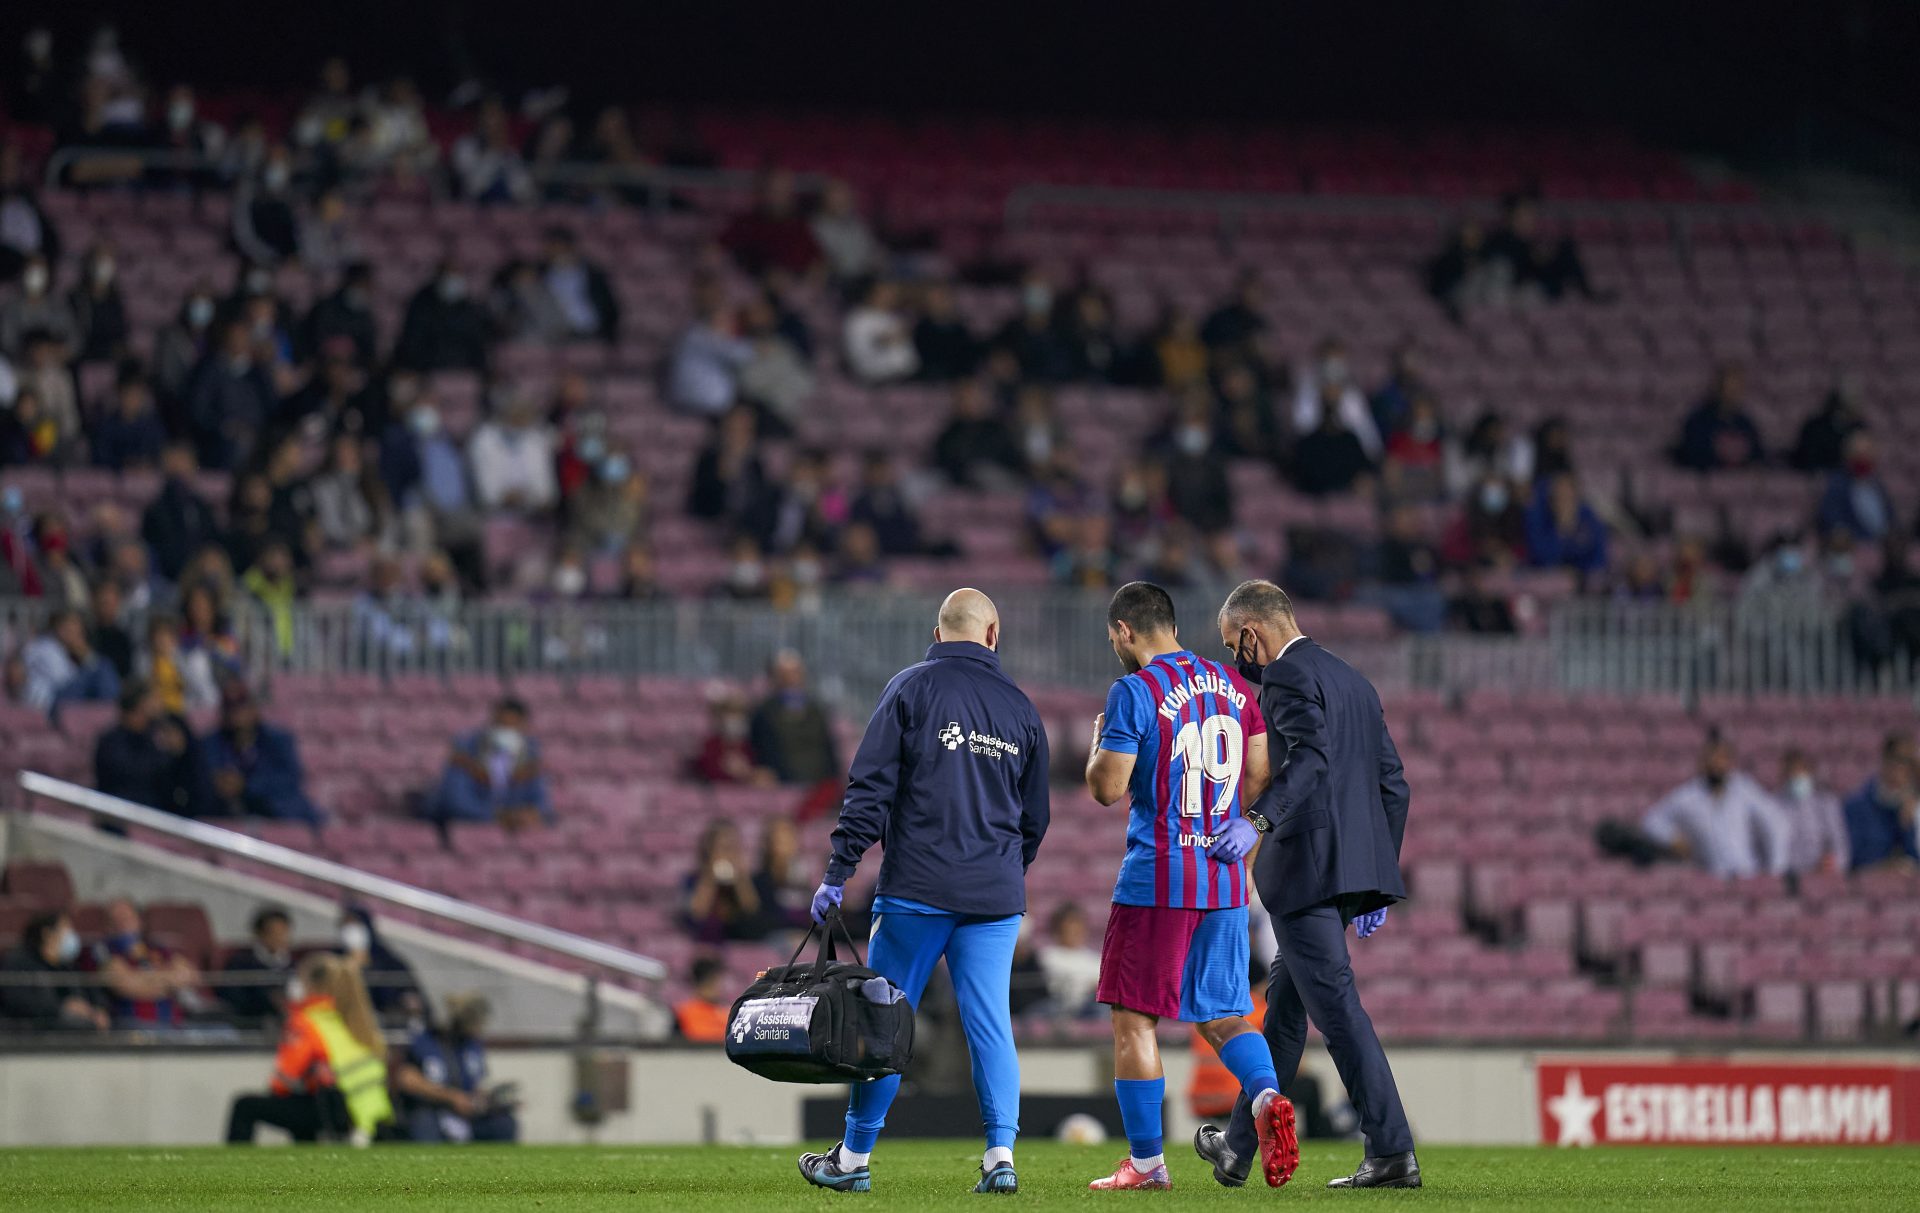 Empty seats are visible at Camp Nou as Sergio
Aguero leaves the field in the draw against
Alaves. Photo: Pedro Salado/Quality Sport Images/Getty